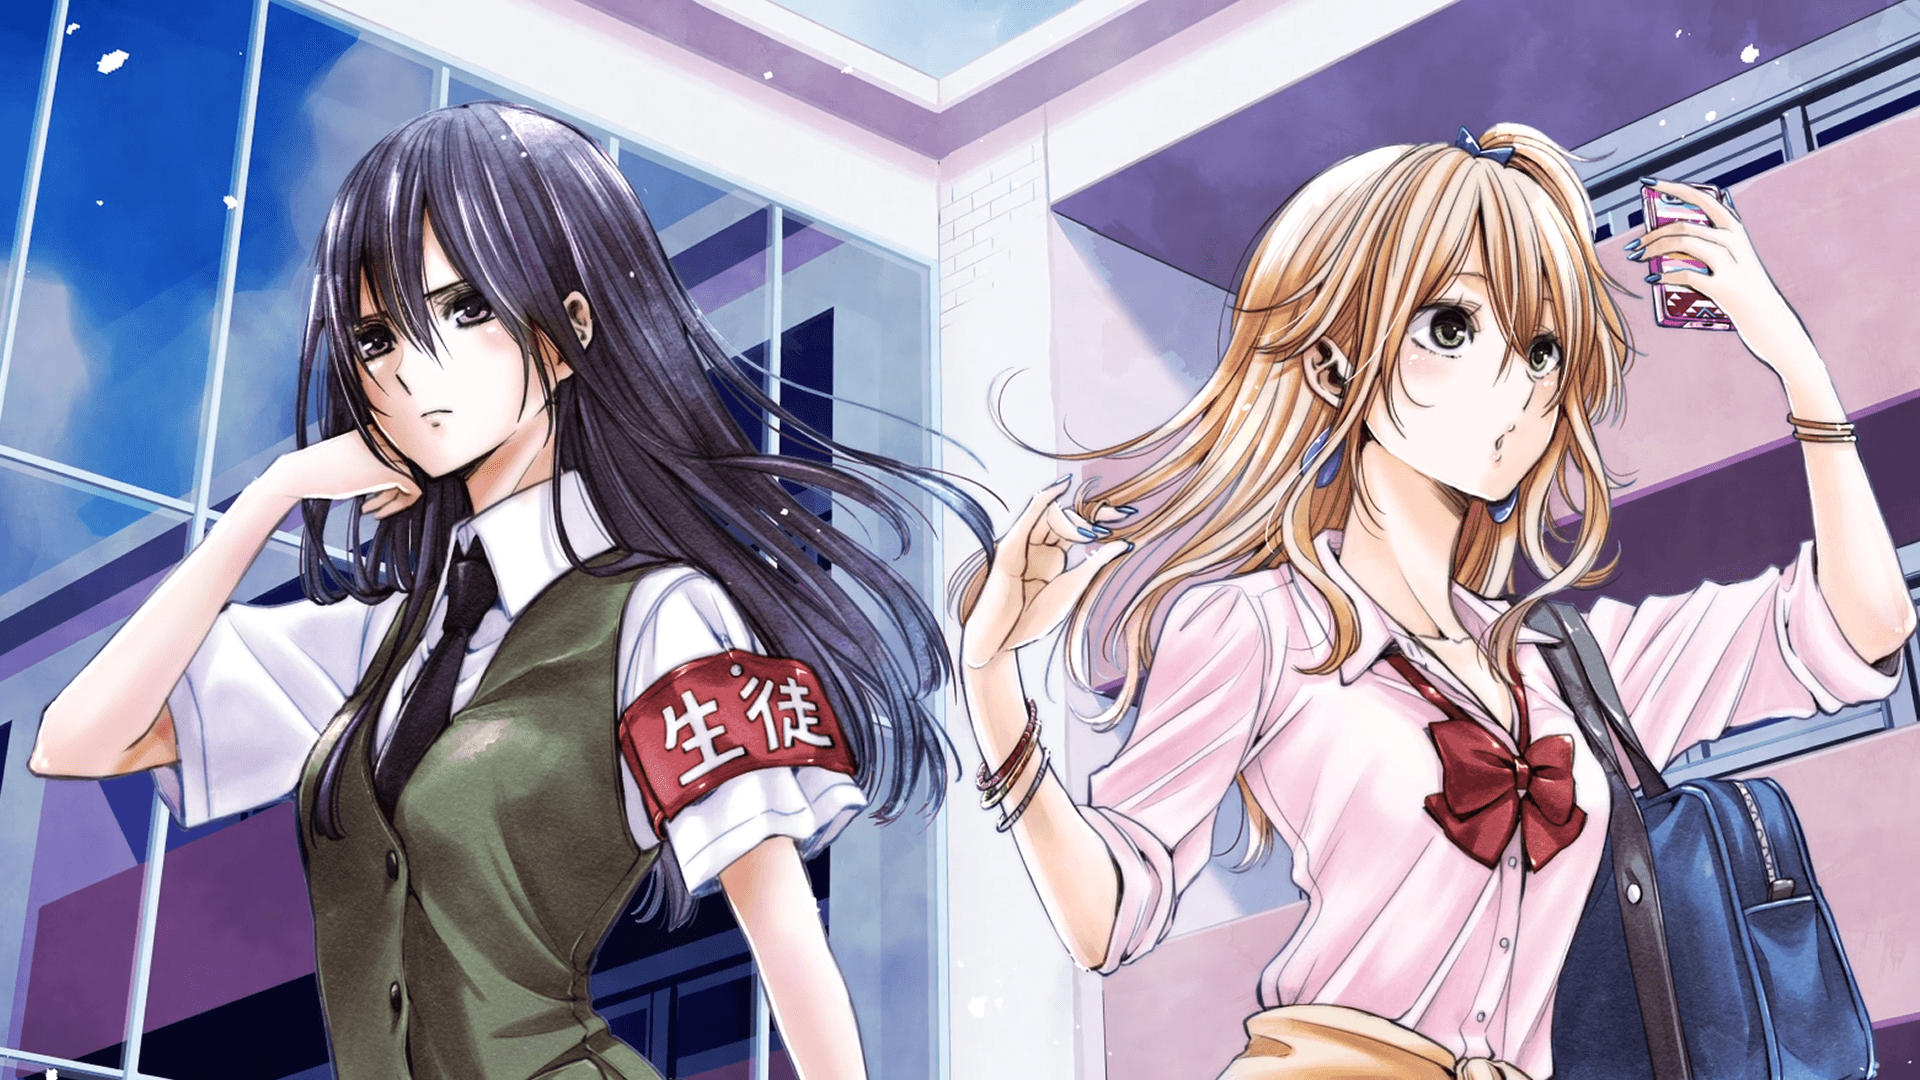 Citrus Full HD Wallpapers and Backgrounds Image.